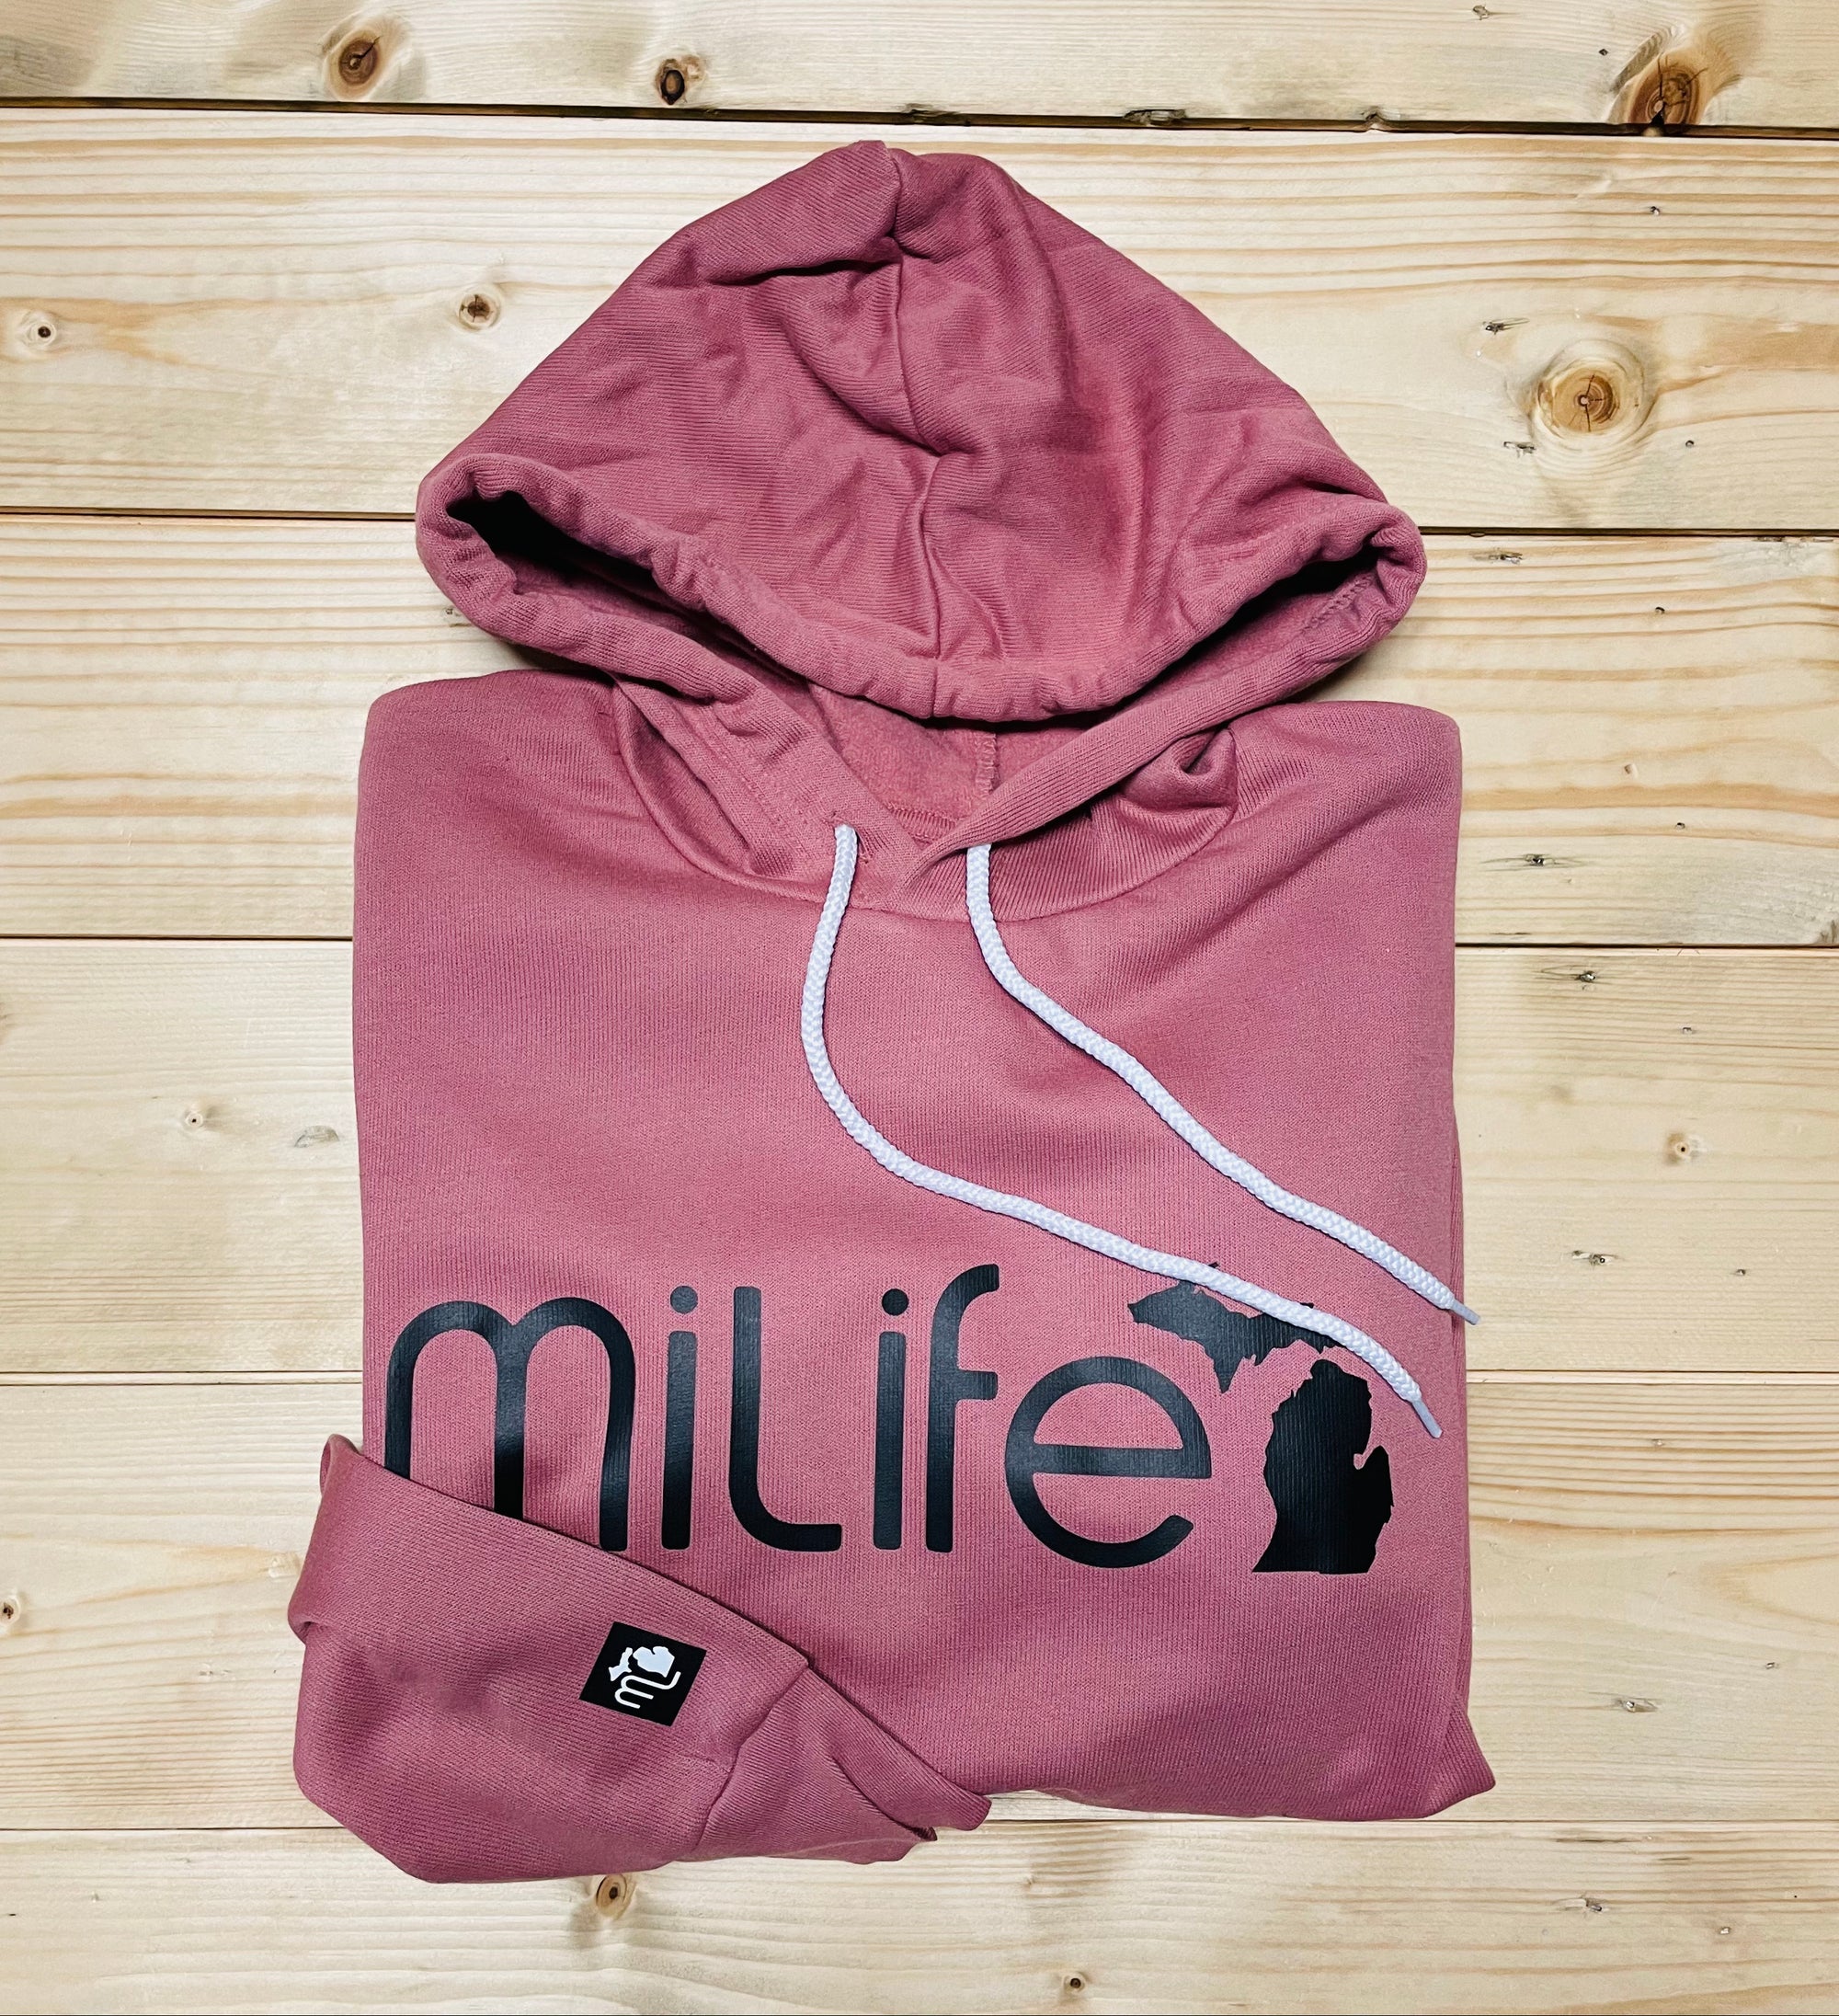 MiLife's most popular crewneck fleece is back just in time for Michigan's summer. If you are walking your dog, skateboarding, out on the boat, of drinking wine at the campfire, our Michigan made MiLife sweatshirts are perfect for any occasion. 